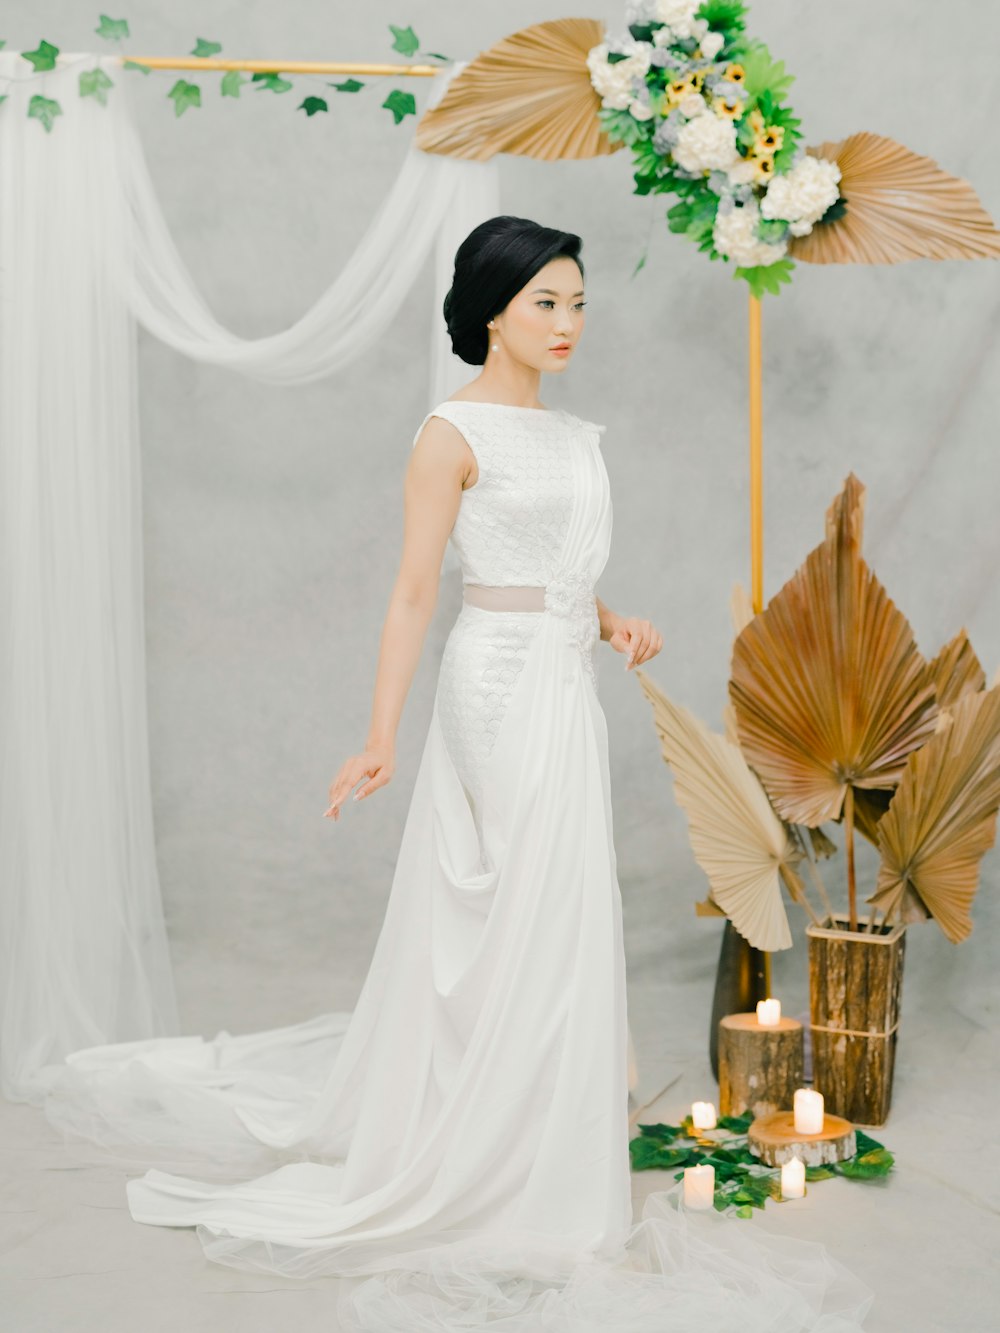 woman in white wedding dress holding bouquet of flowers